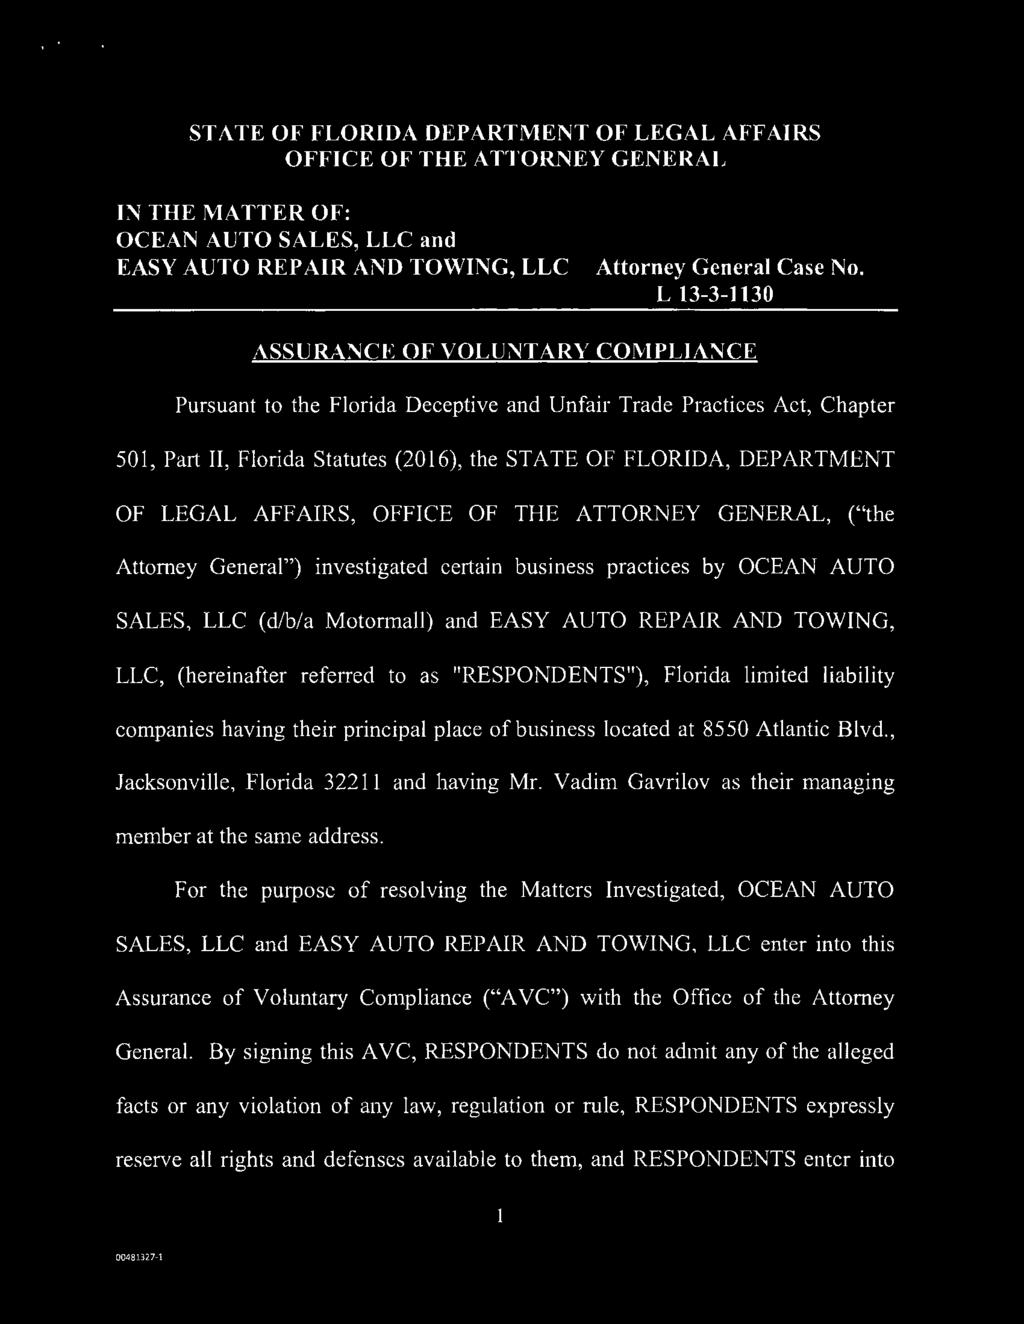 LEGAL AFFAIRS, OFFICE OF THE ATTORNEY GENERAL, ("the Attorney General") investigated certain business practices by OCEAN AUTO SALES, LLC (d/b/a Motormall) and EASY AUTO REPAIR AND TOWING, LLC,